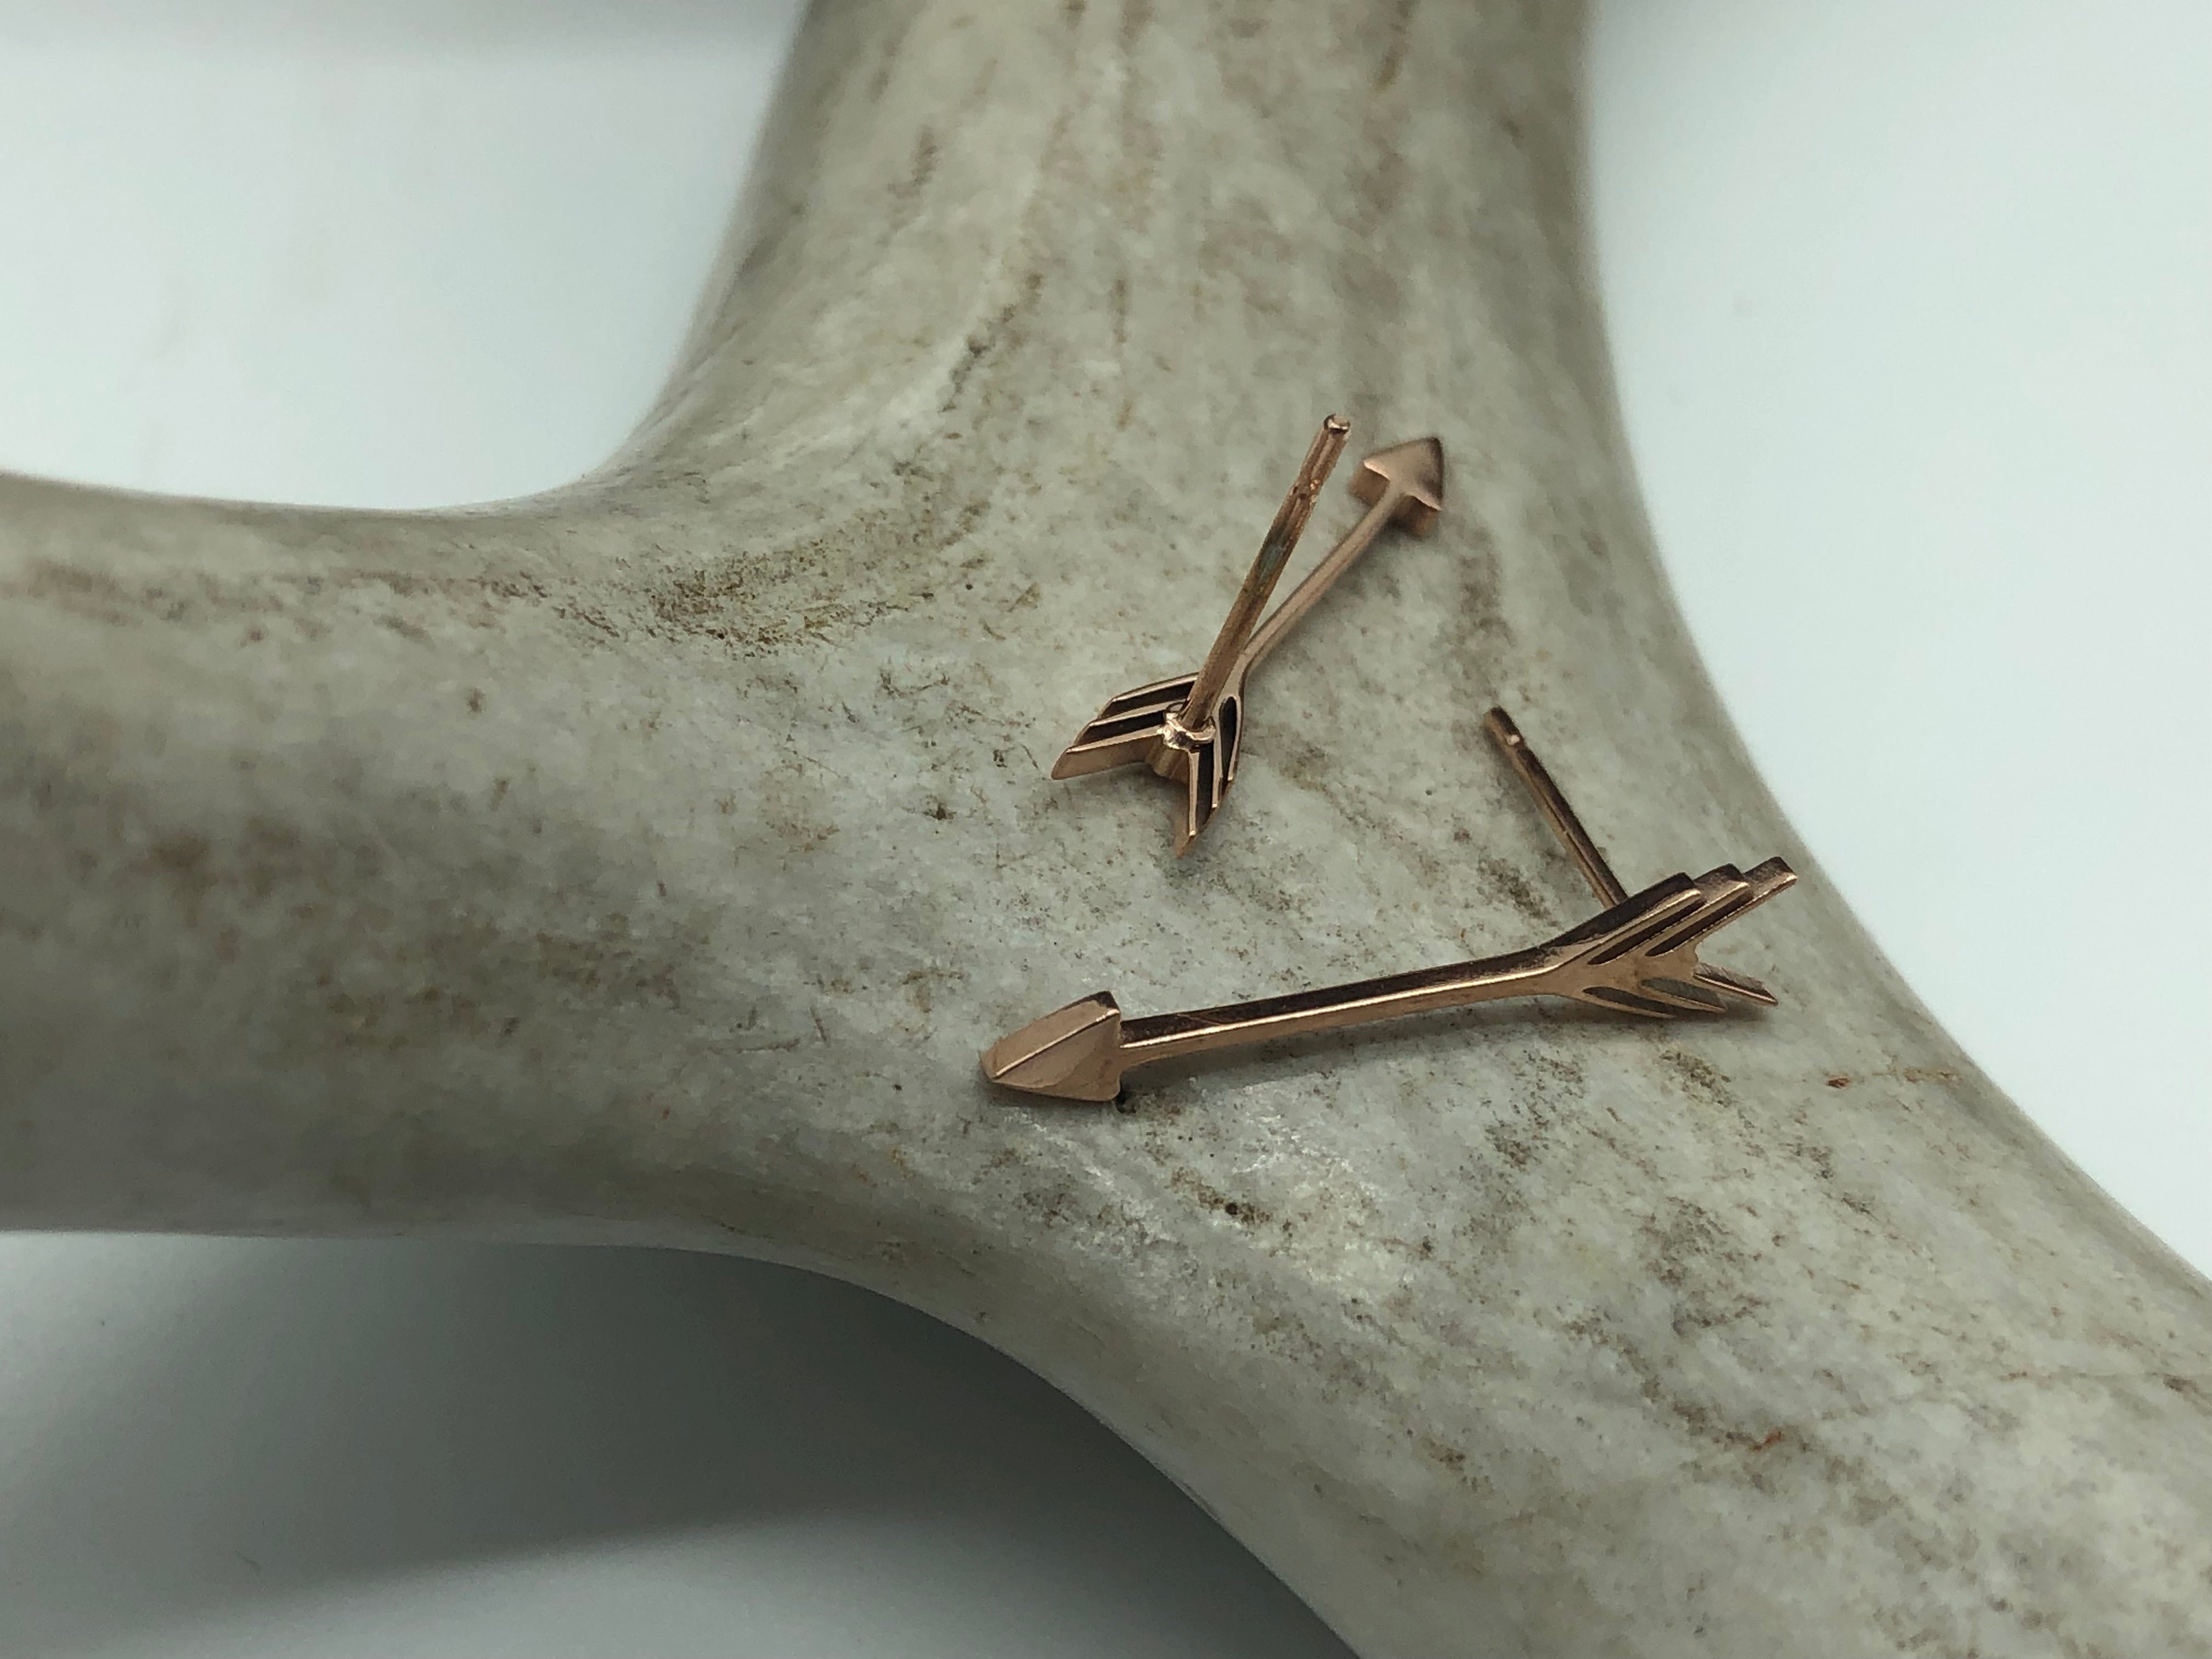 Petite arrow studs made from stainless steel in rose gold and silver